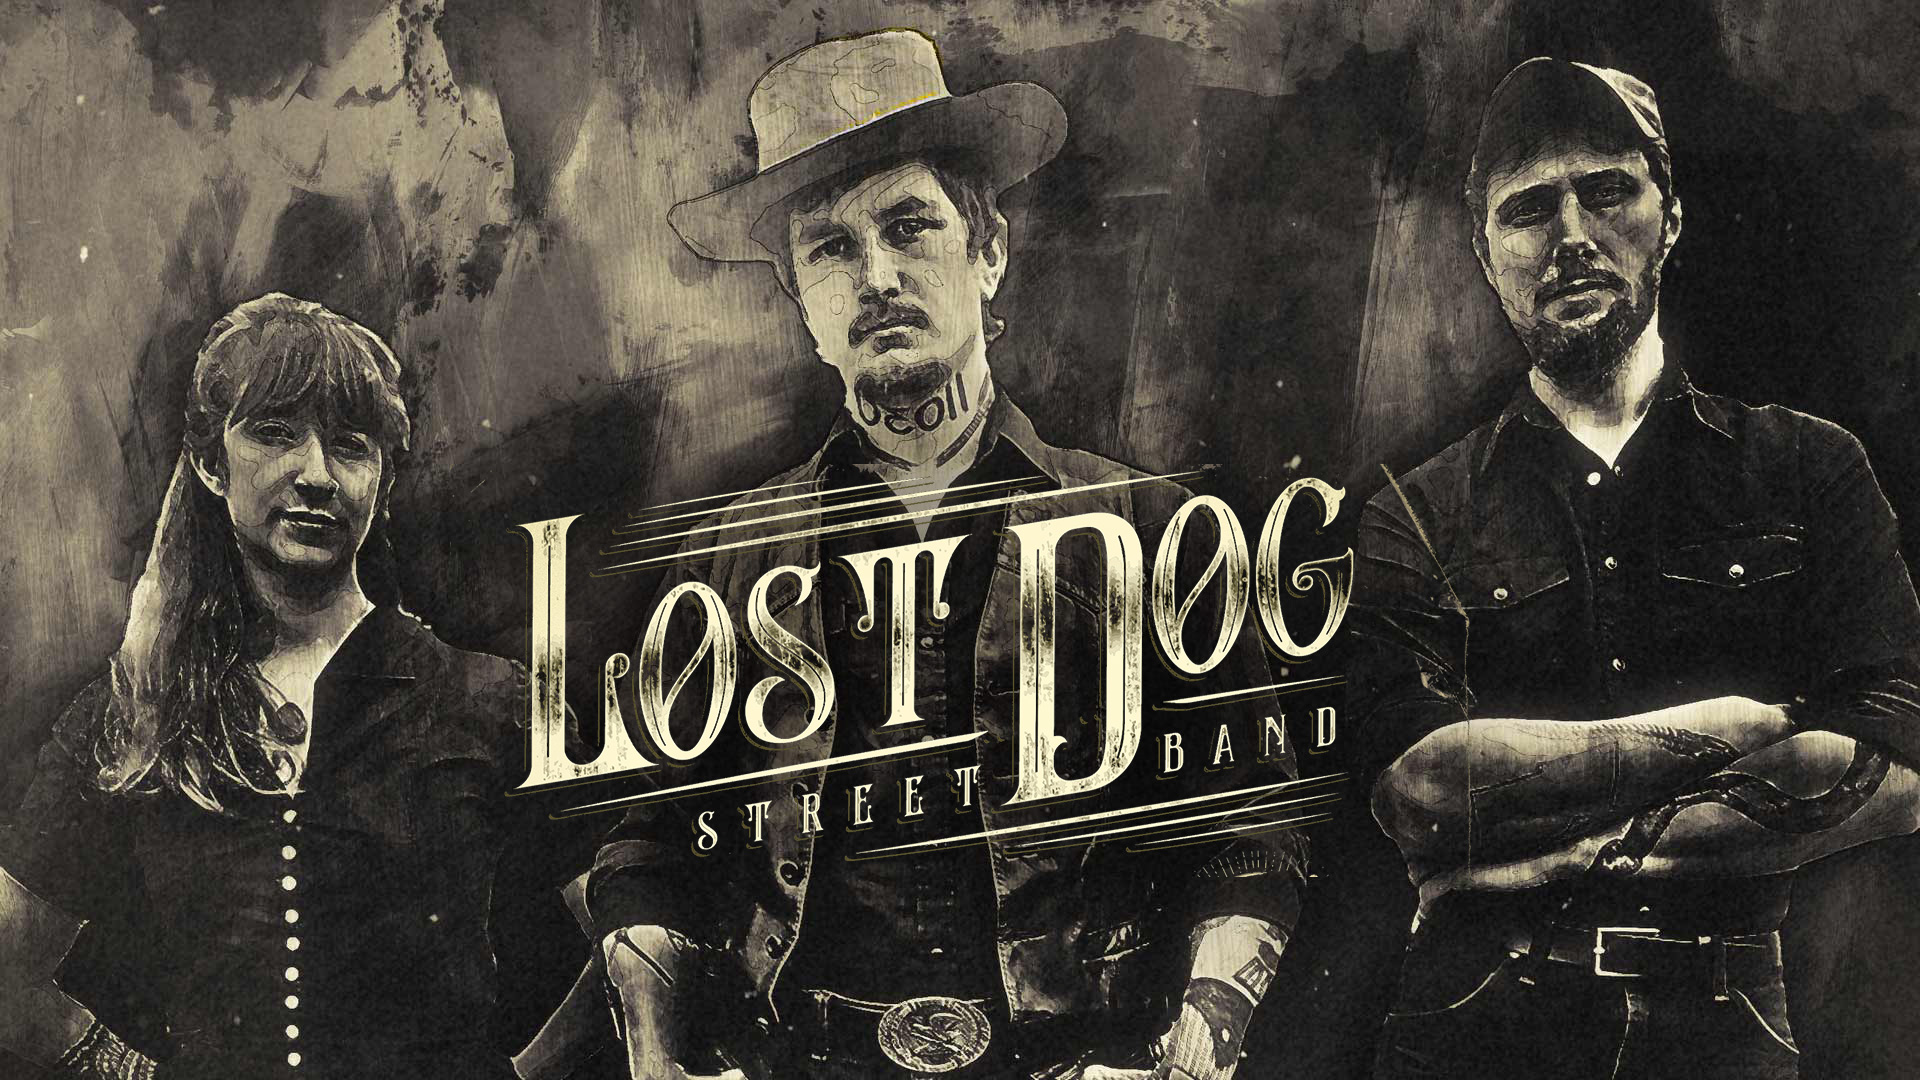 Lost Dog Street Band RESCHEDULED DATE FPC Live